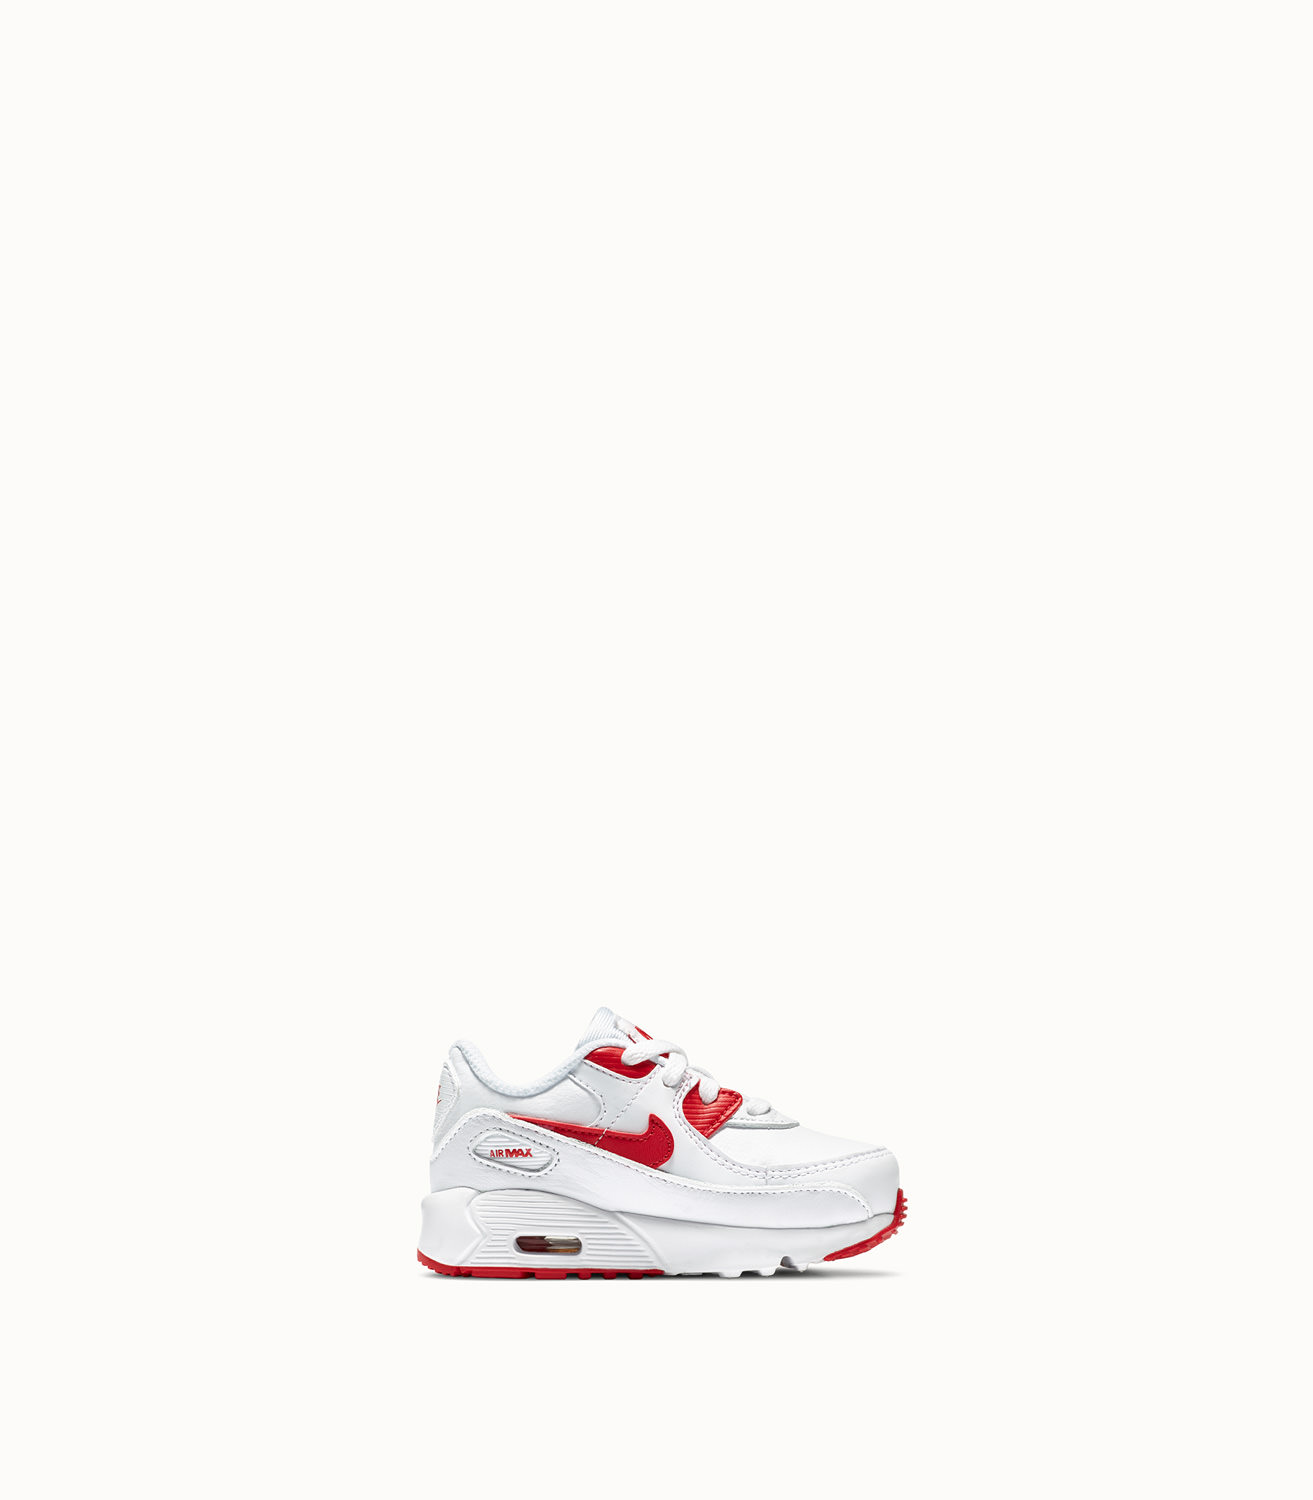 nike white shoes with red logo